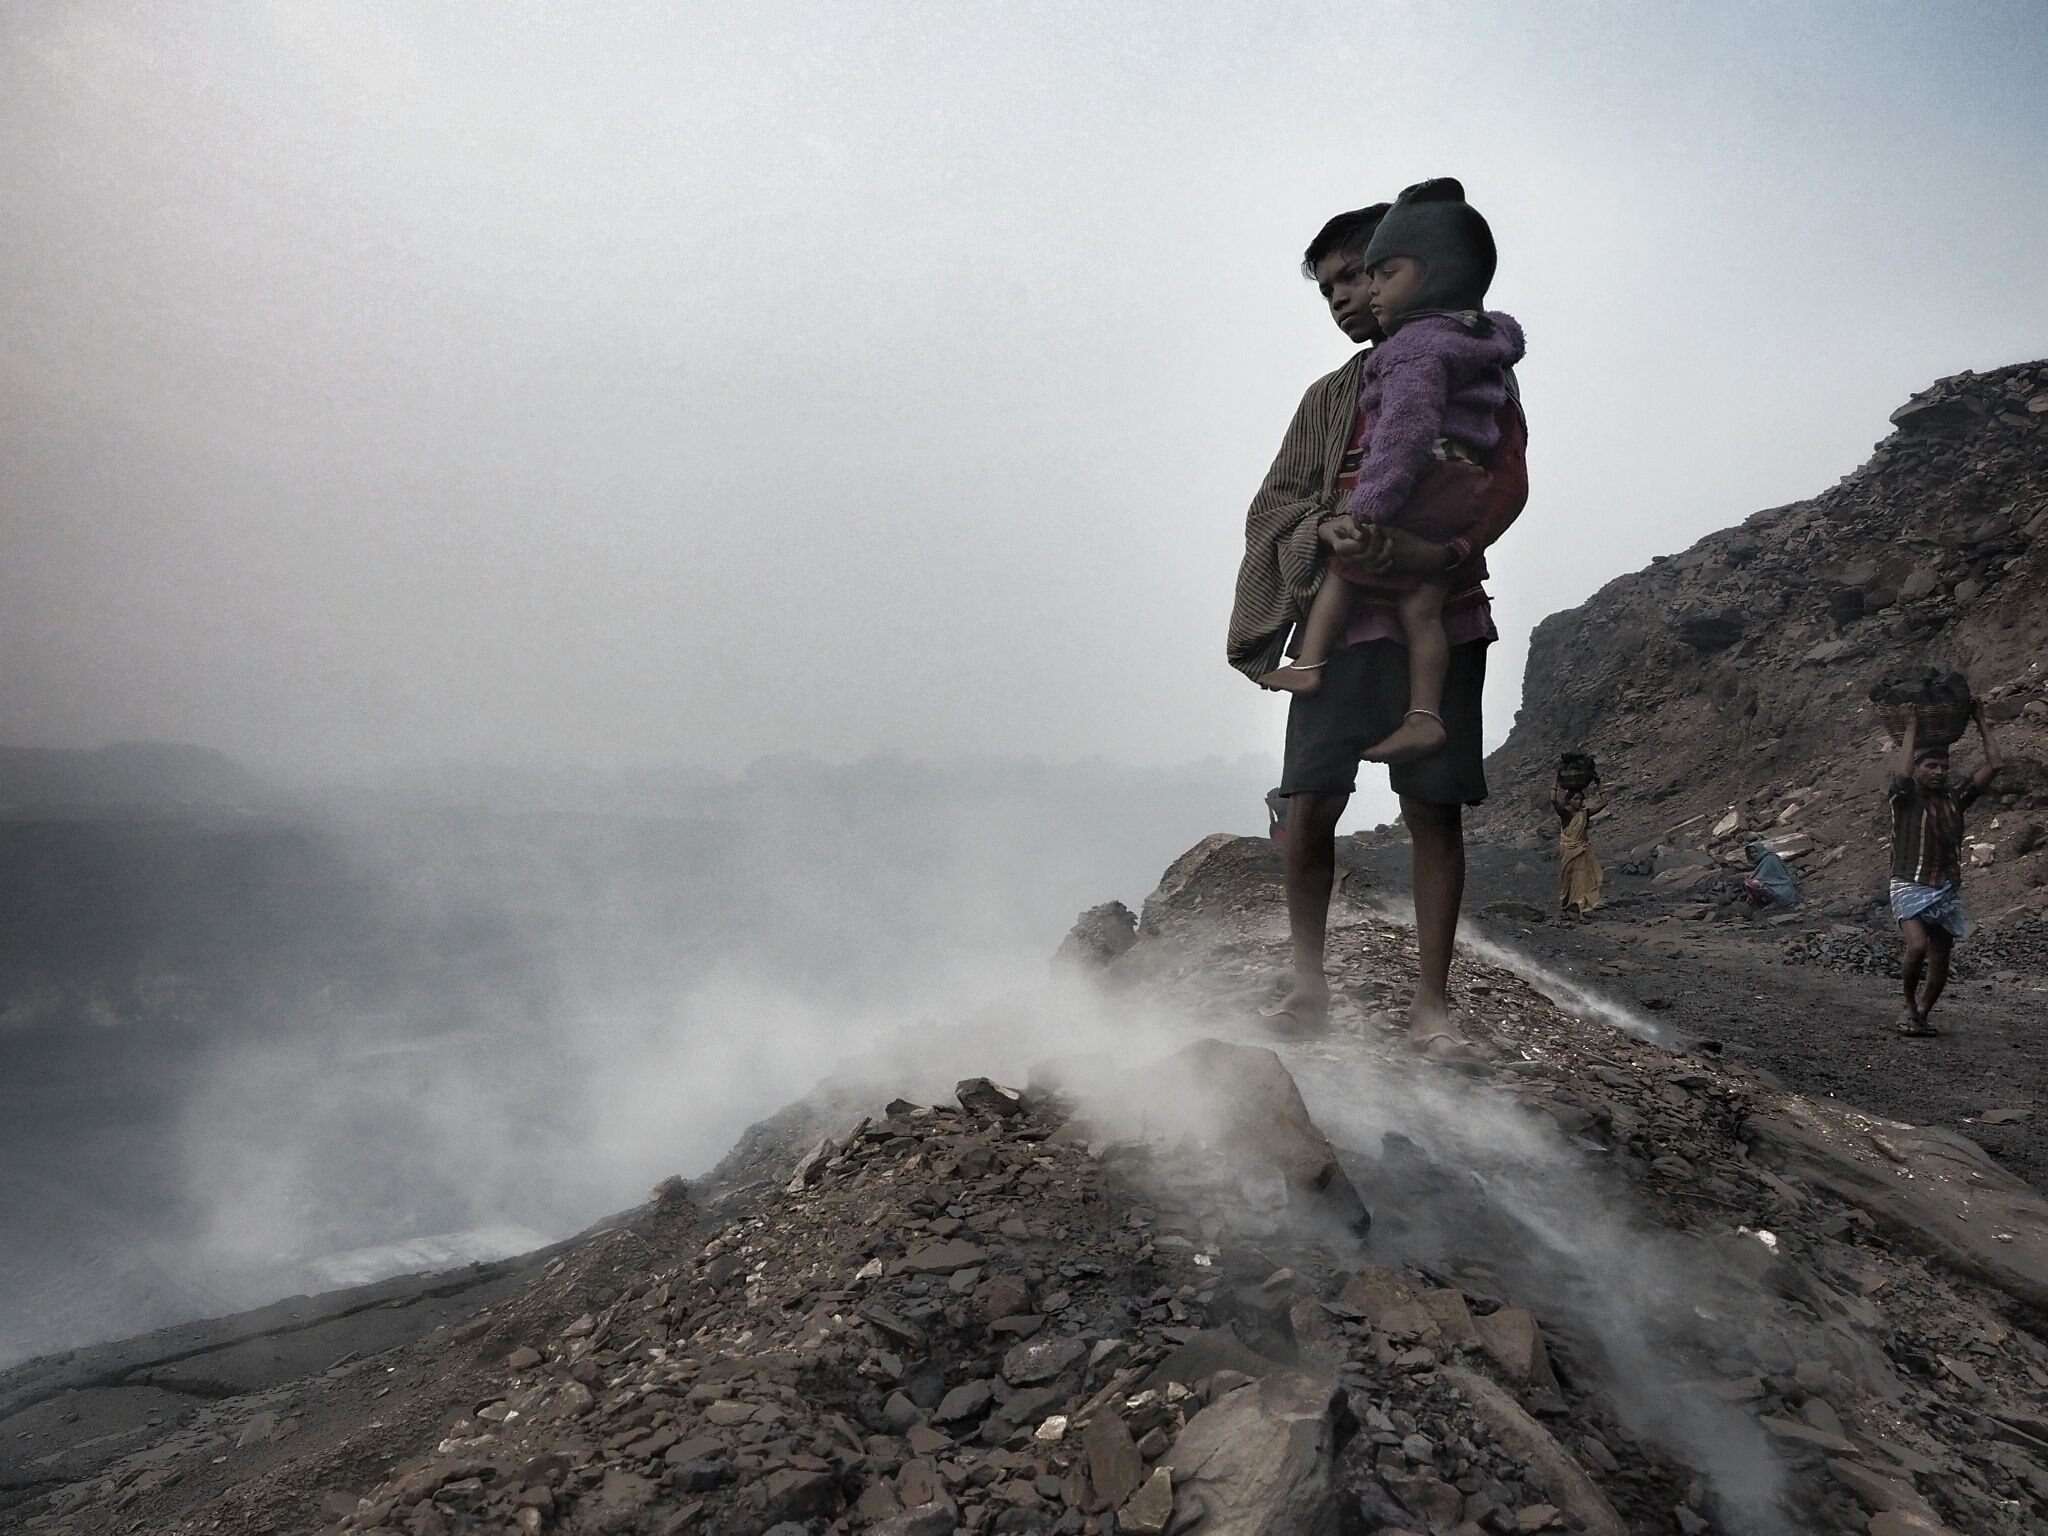 A young boy holds his baby brother on the edge of the Alkusha mine at Ganshadih.